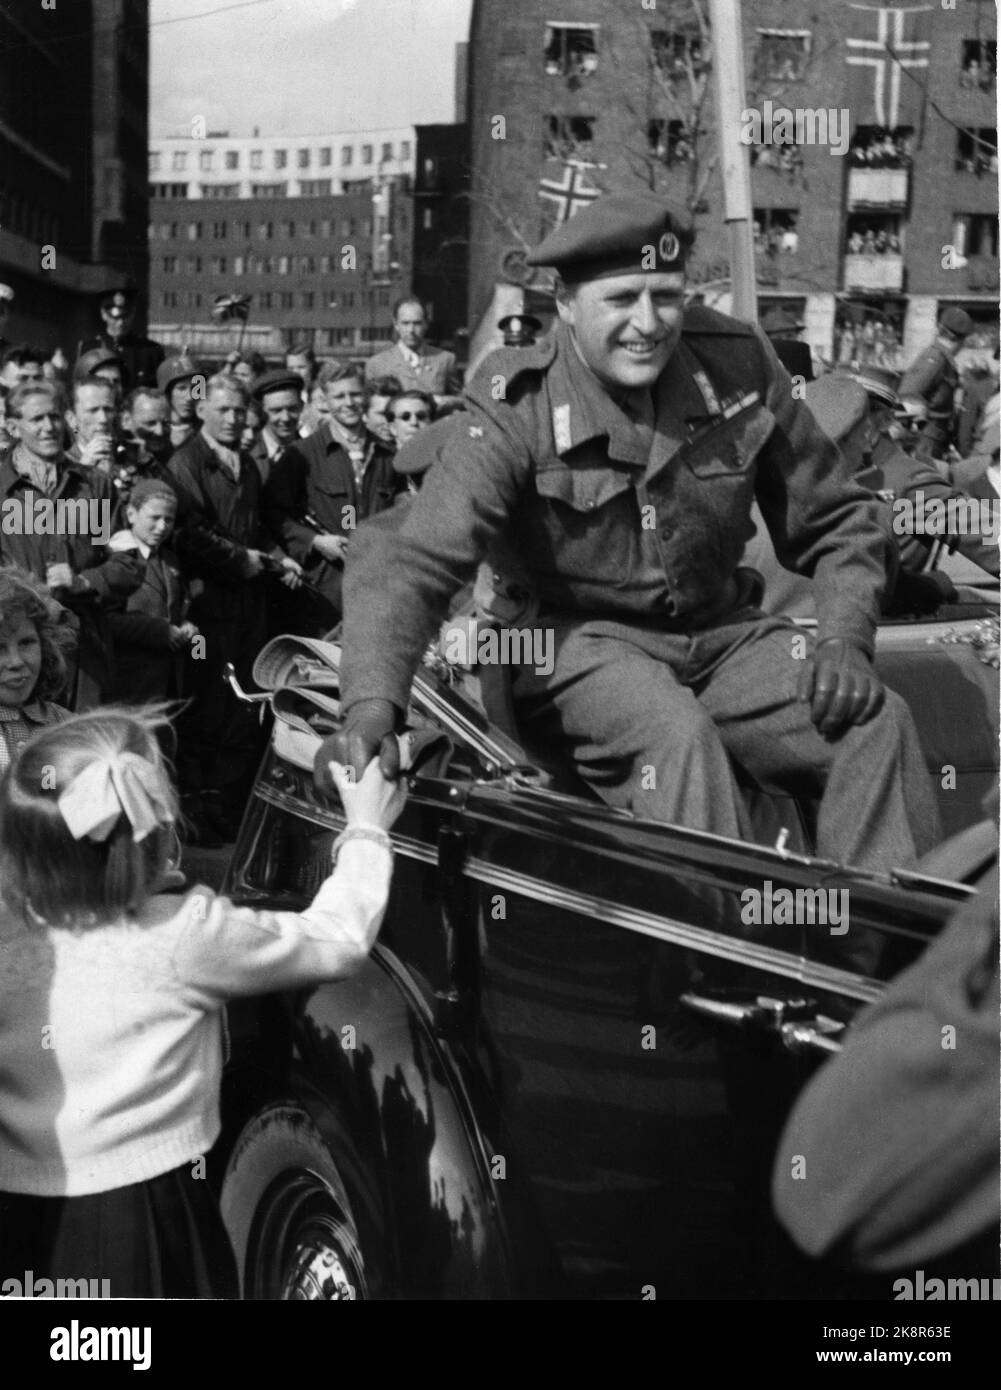 Oslo 19450513. The liberation: Crown Prince Olav receives a warm welcome when he returns to Norway. He was met by large crowds at the town hall square on arrival. Smiling Crown Prince Olav in an open car, greets a little girl. Ntb archive photo / ntb Stock Photo